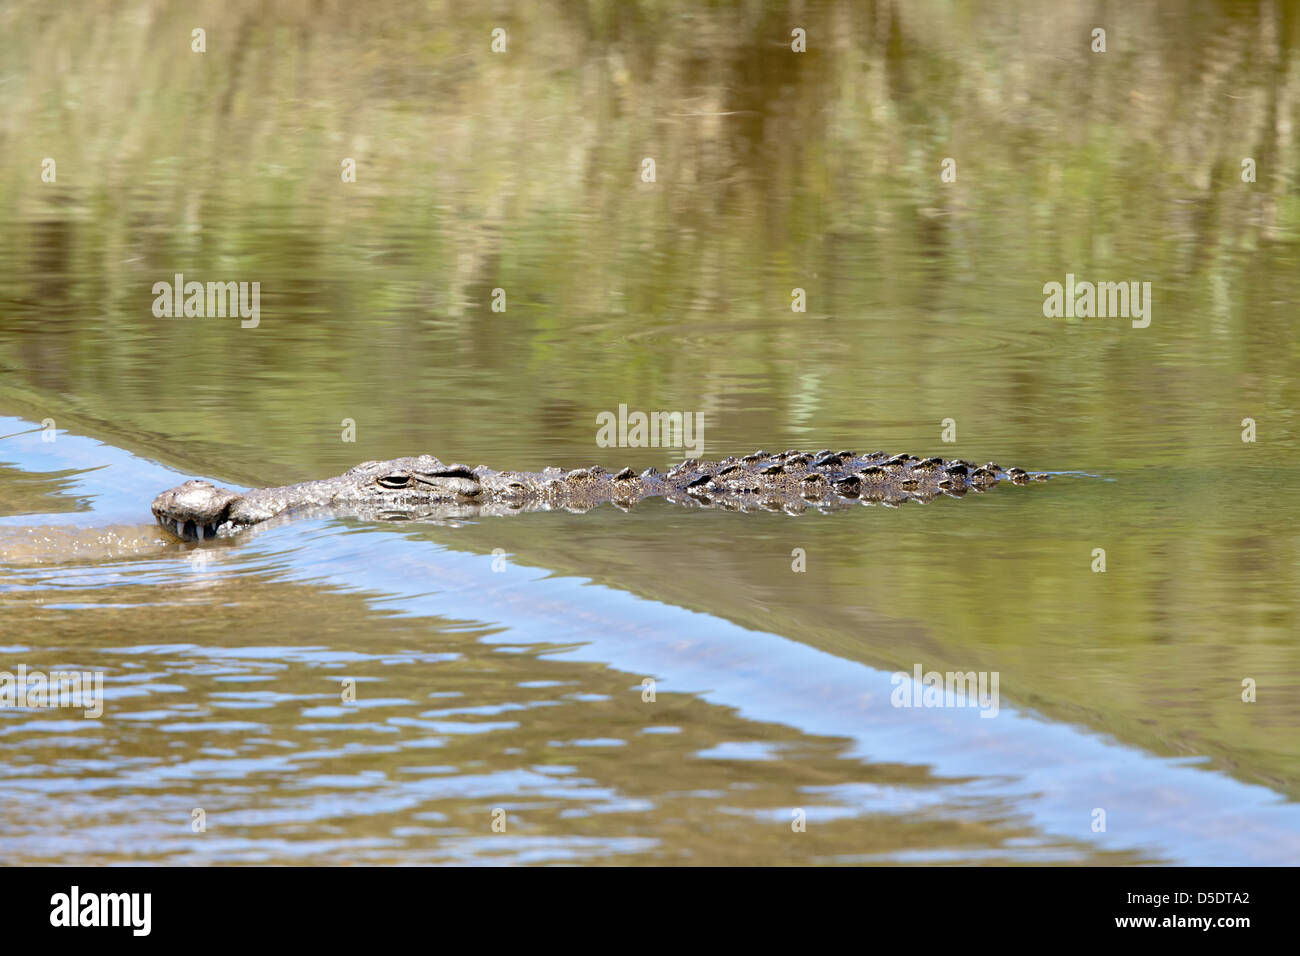 Haunting crocodile in shallow water. South Africa, Kruger's National Park. Stock Photo